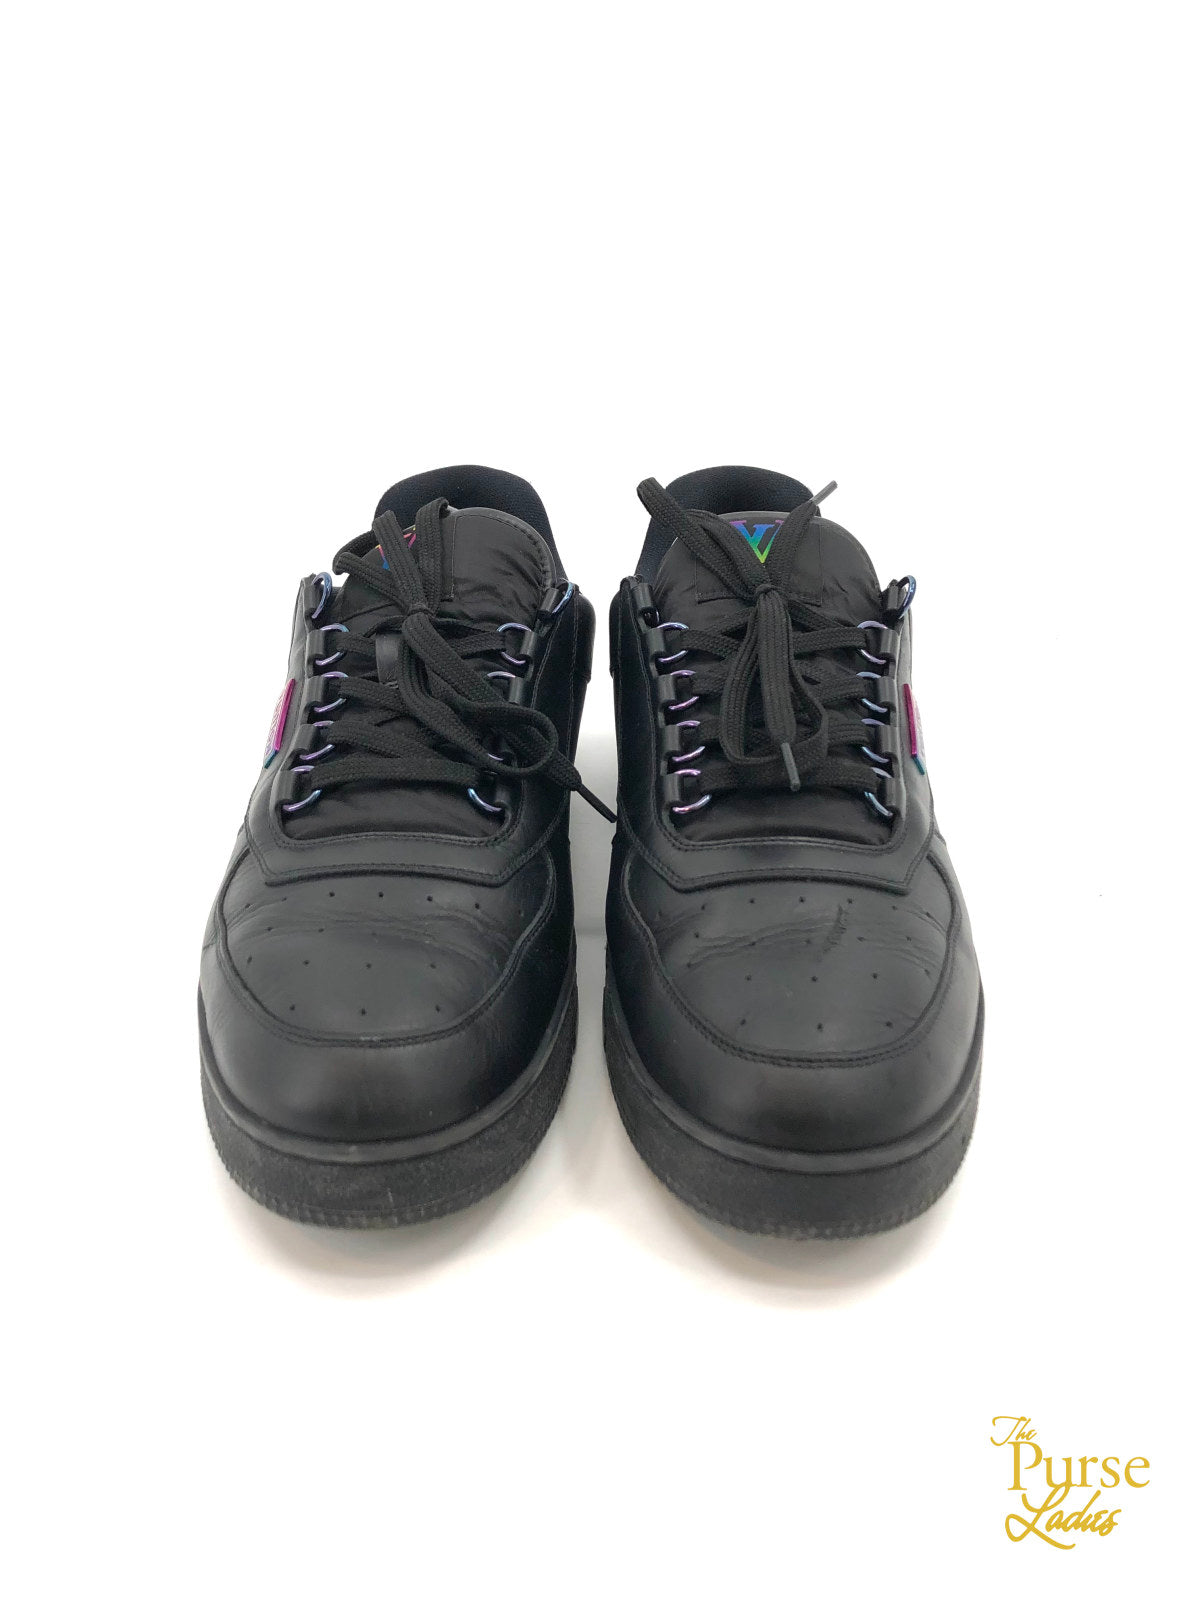 Louis Vuitton LV Skate Leather & Technical Mesh Anthracite Low Top